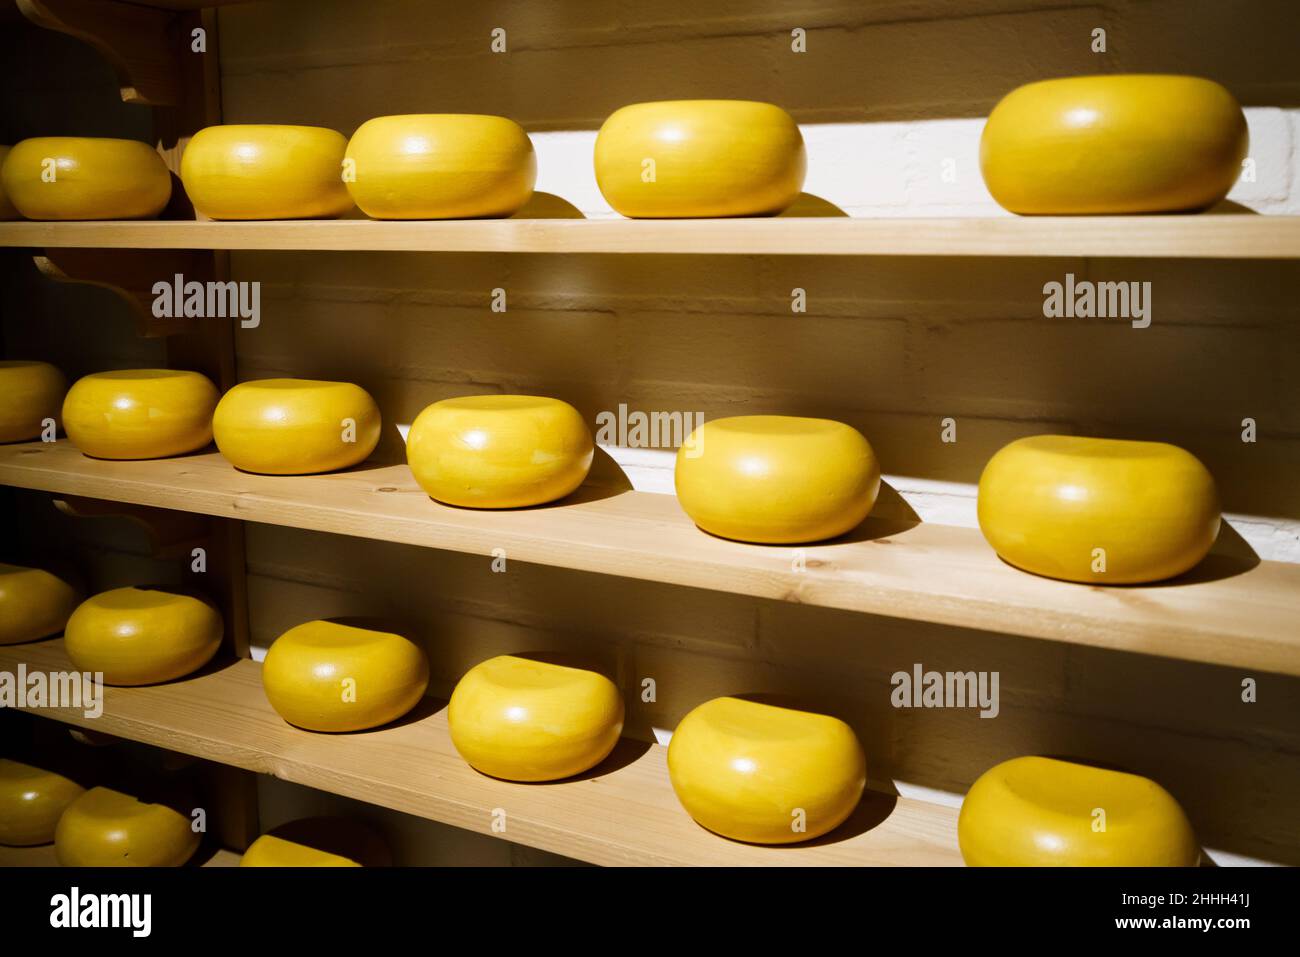 Cheese shop display. Farmer cheese. Cheese wheels in store Stock Photo